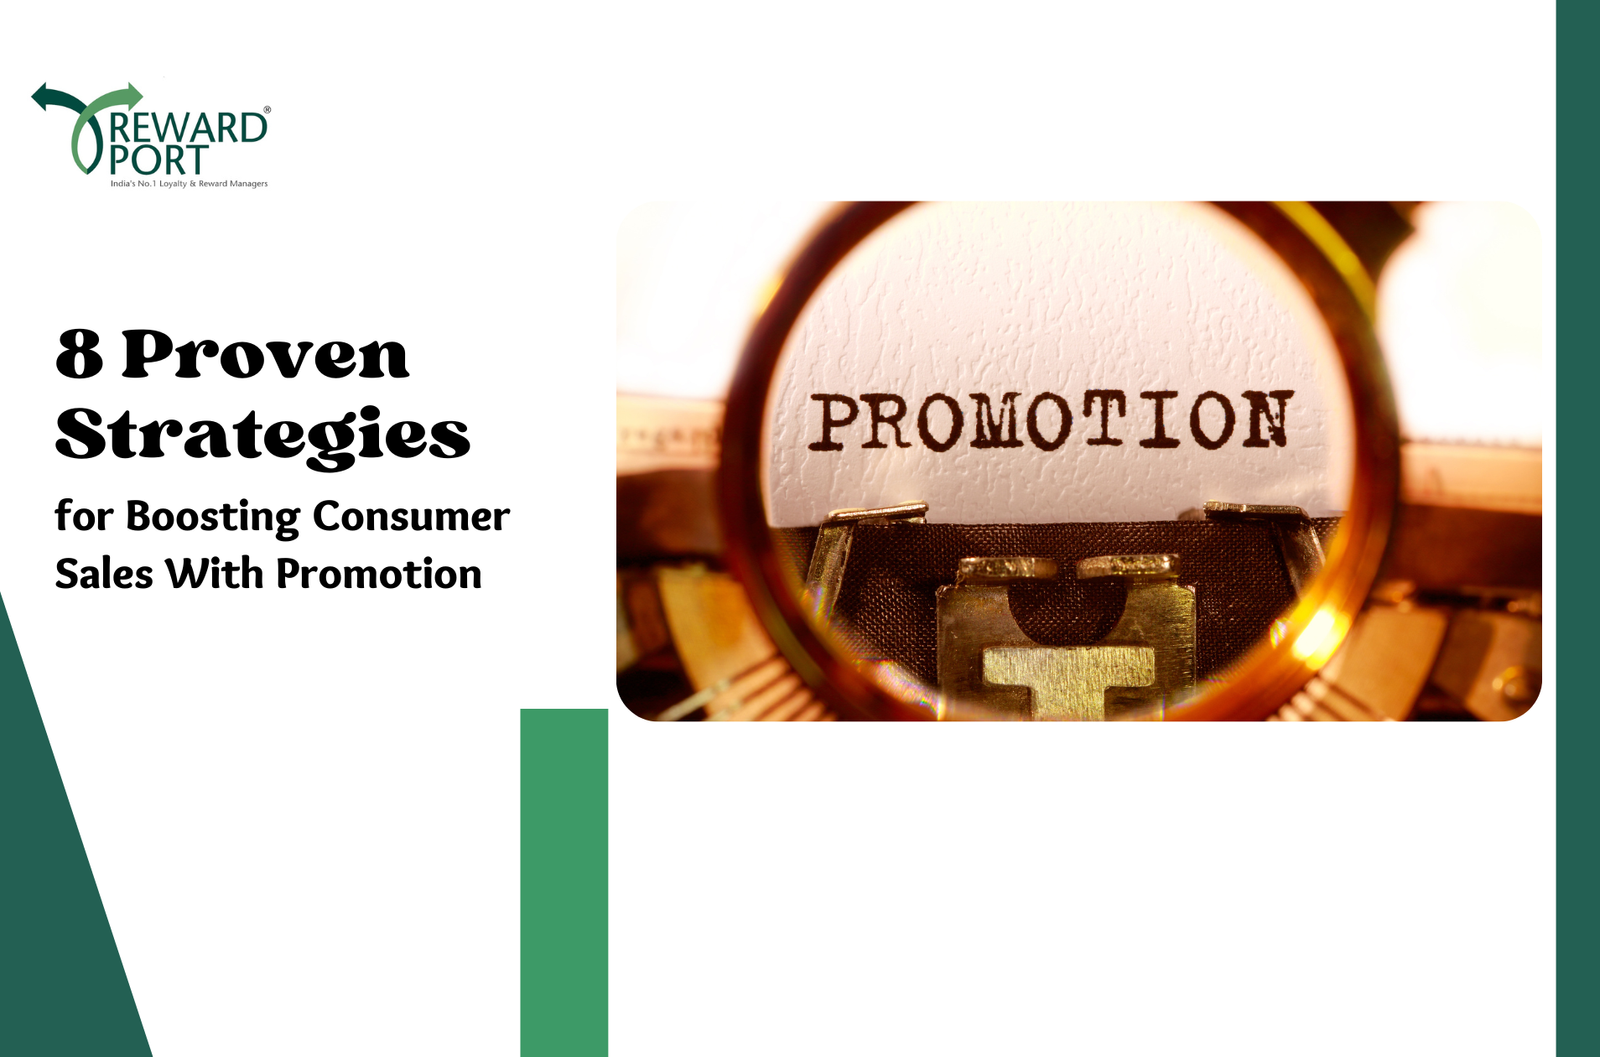 8 Proven Strategies for Boosting Consumer Sales With Promotion